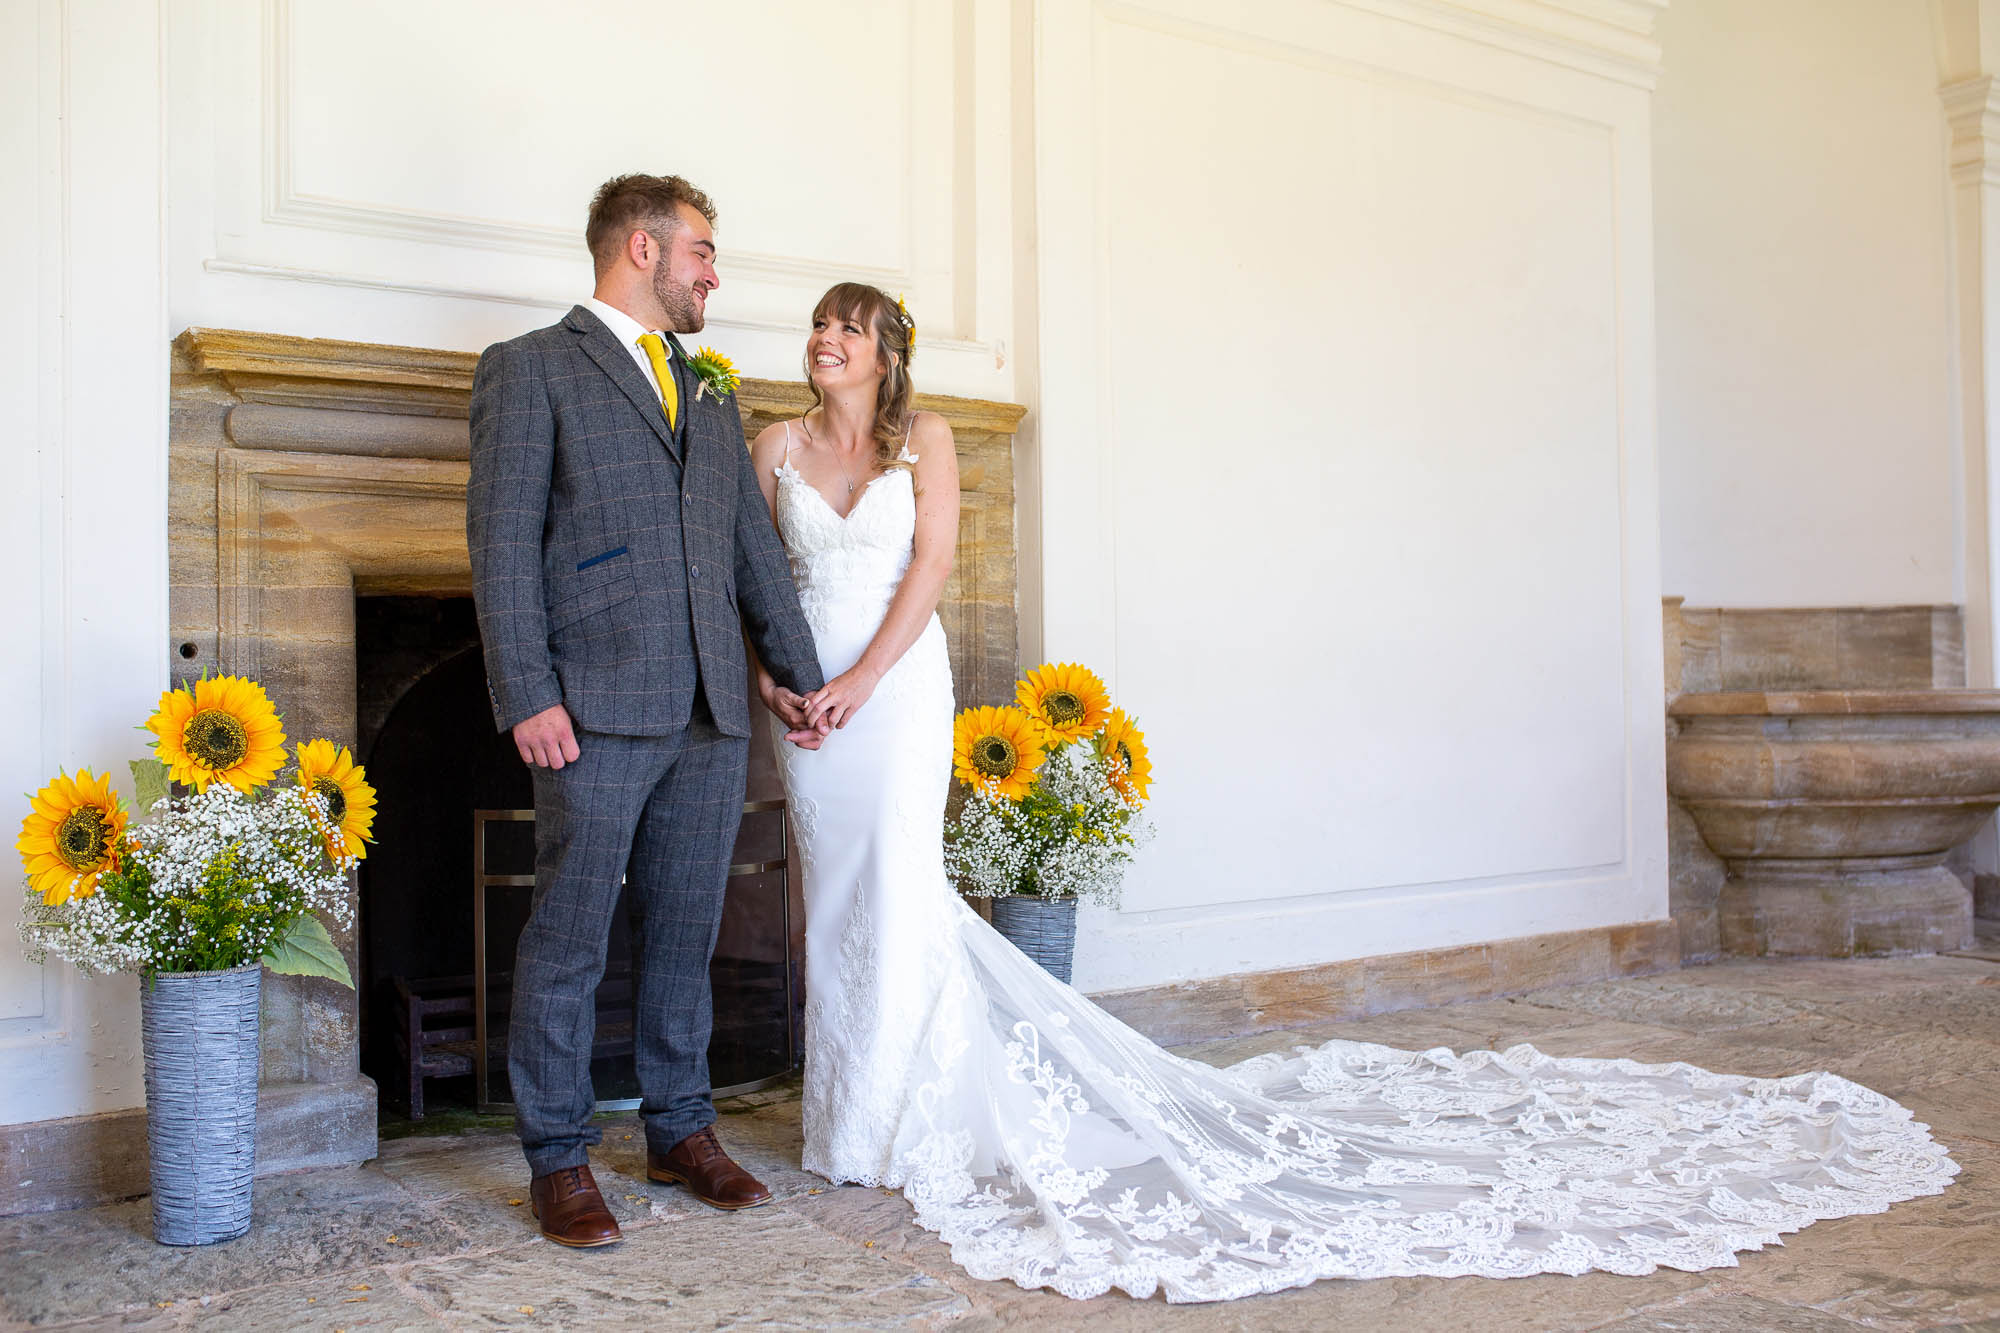 Meg wears an Enzoani dress for her summer wedding to Joe at sunny Hestercombe Gardens. With Martin Dabek Photography